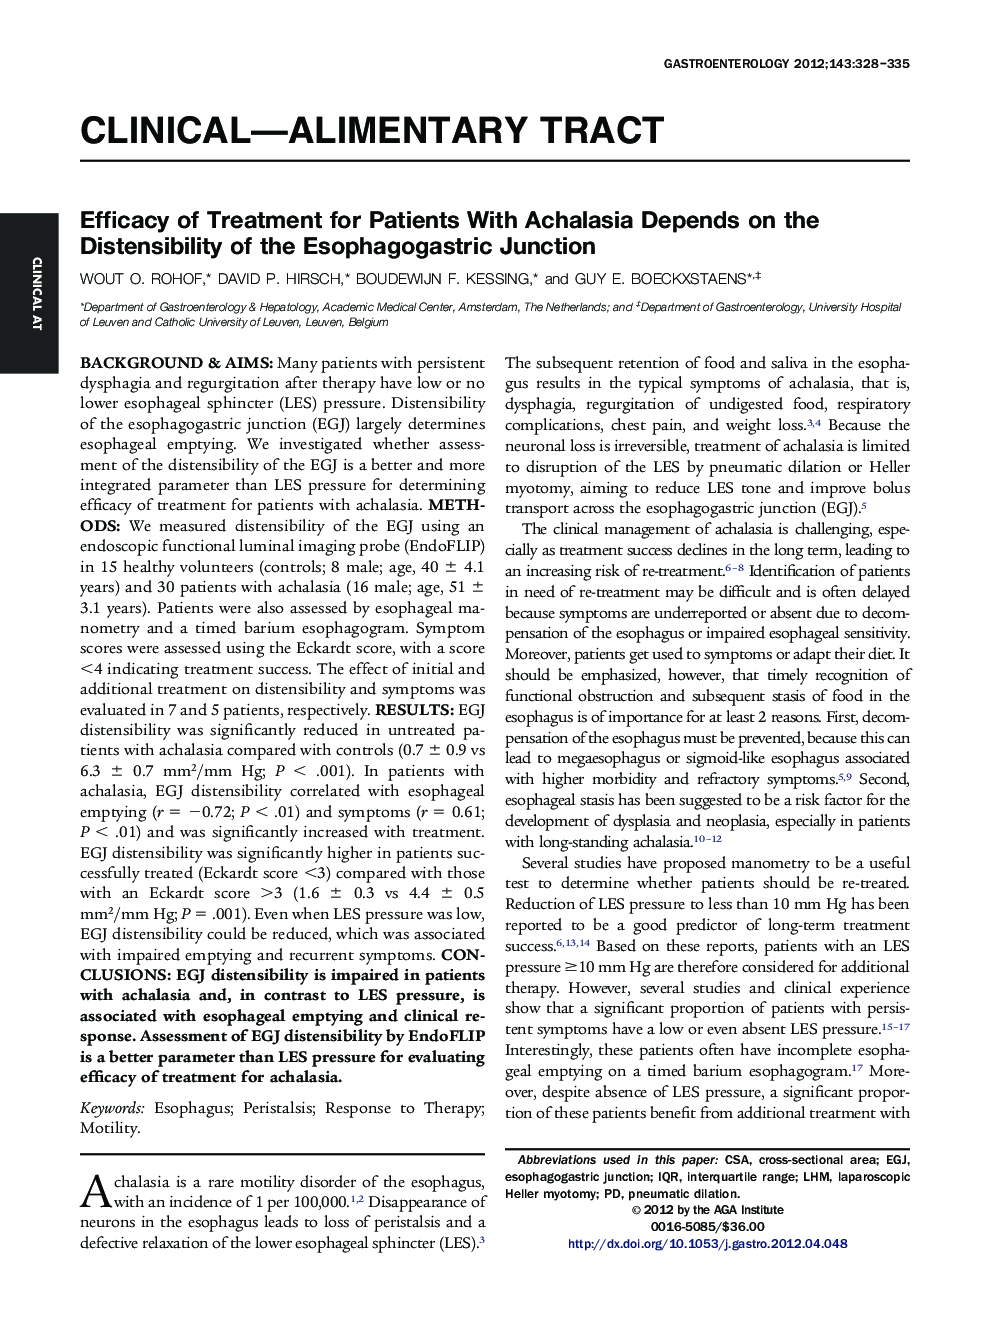 Efficacy of Treatment for Patients With Achalasia Depends on the Distensibility of the Esophagogastric Junction 